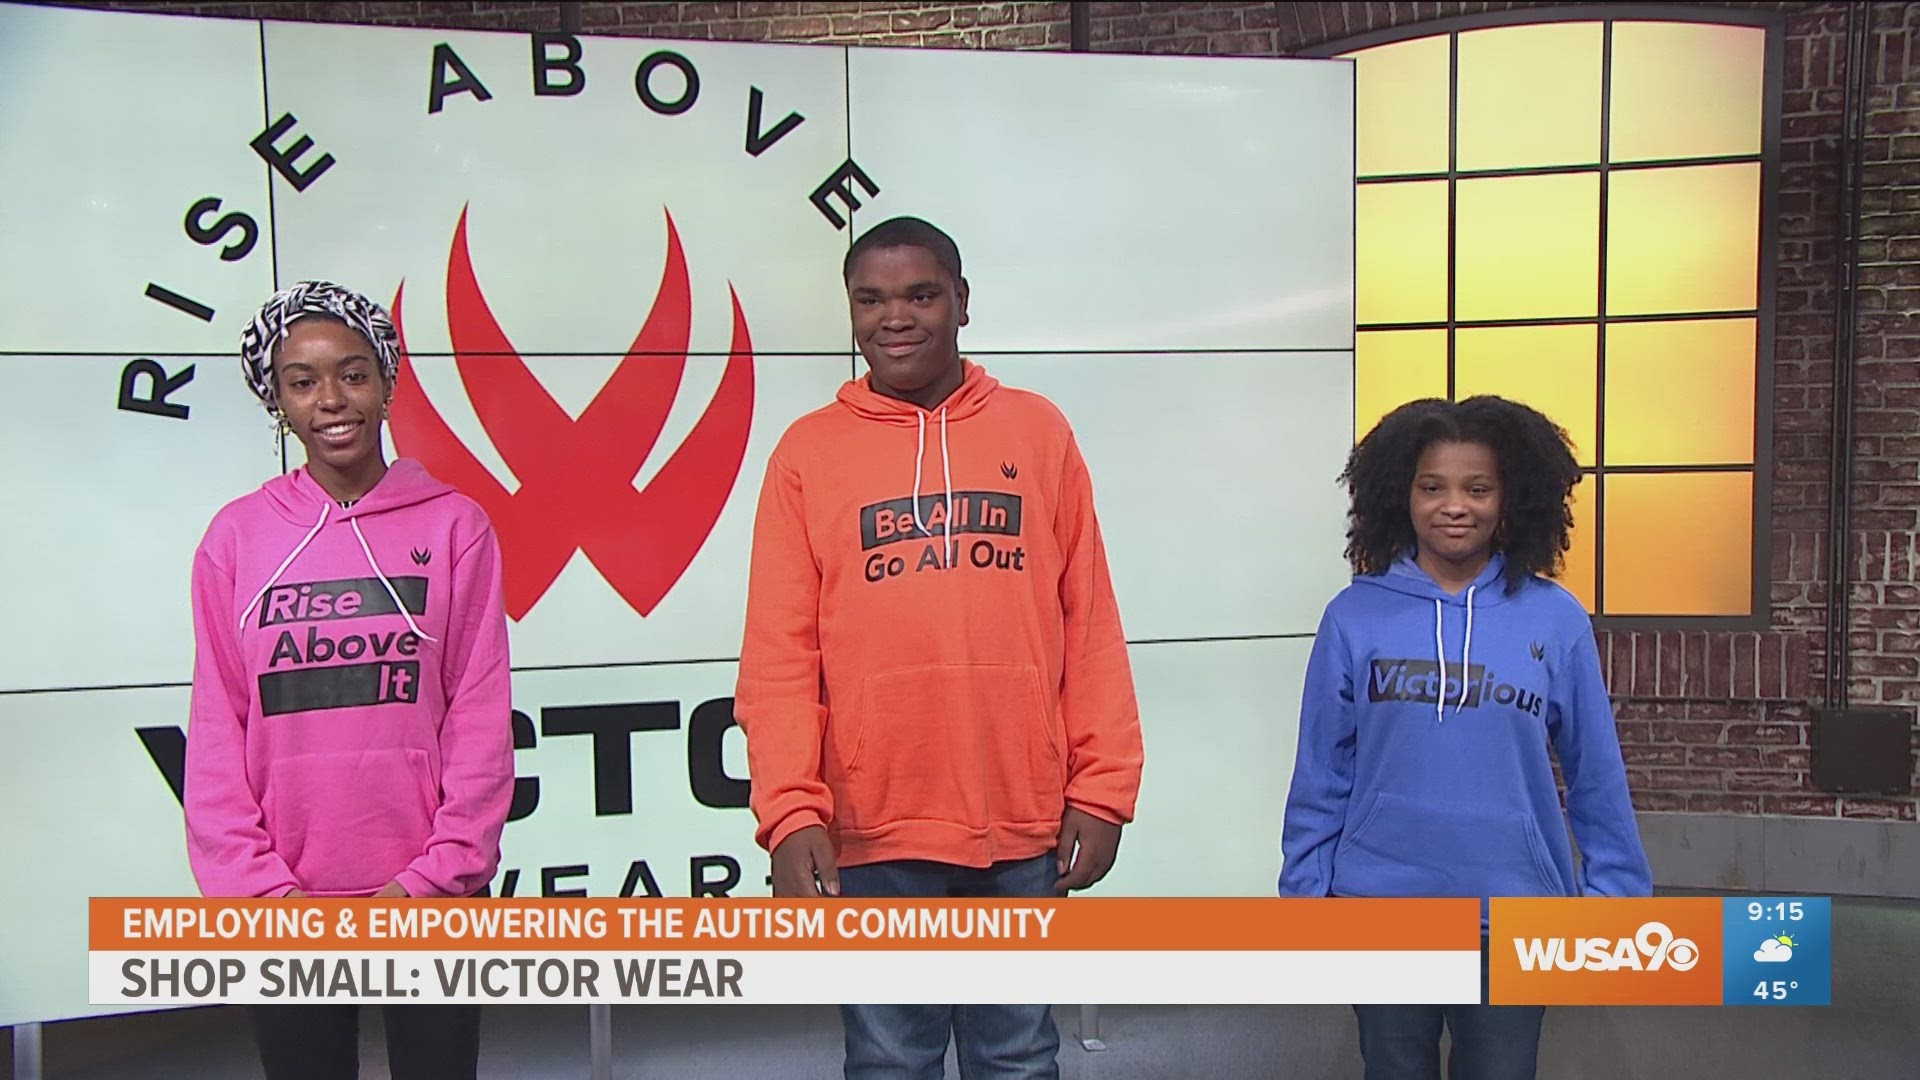 Tiffany Hamilton and Isaiah Hamilton founded Victor Wear, a clothing line to empower and employ The Autism Community.